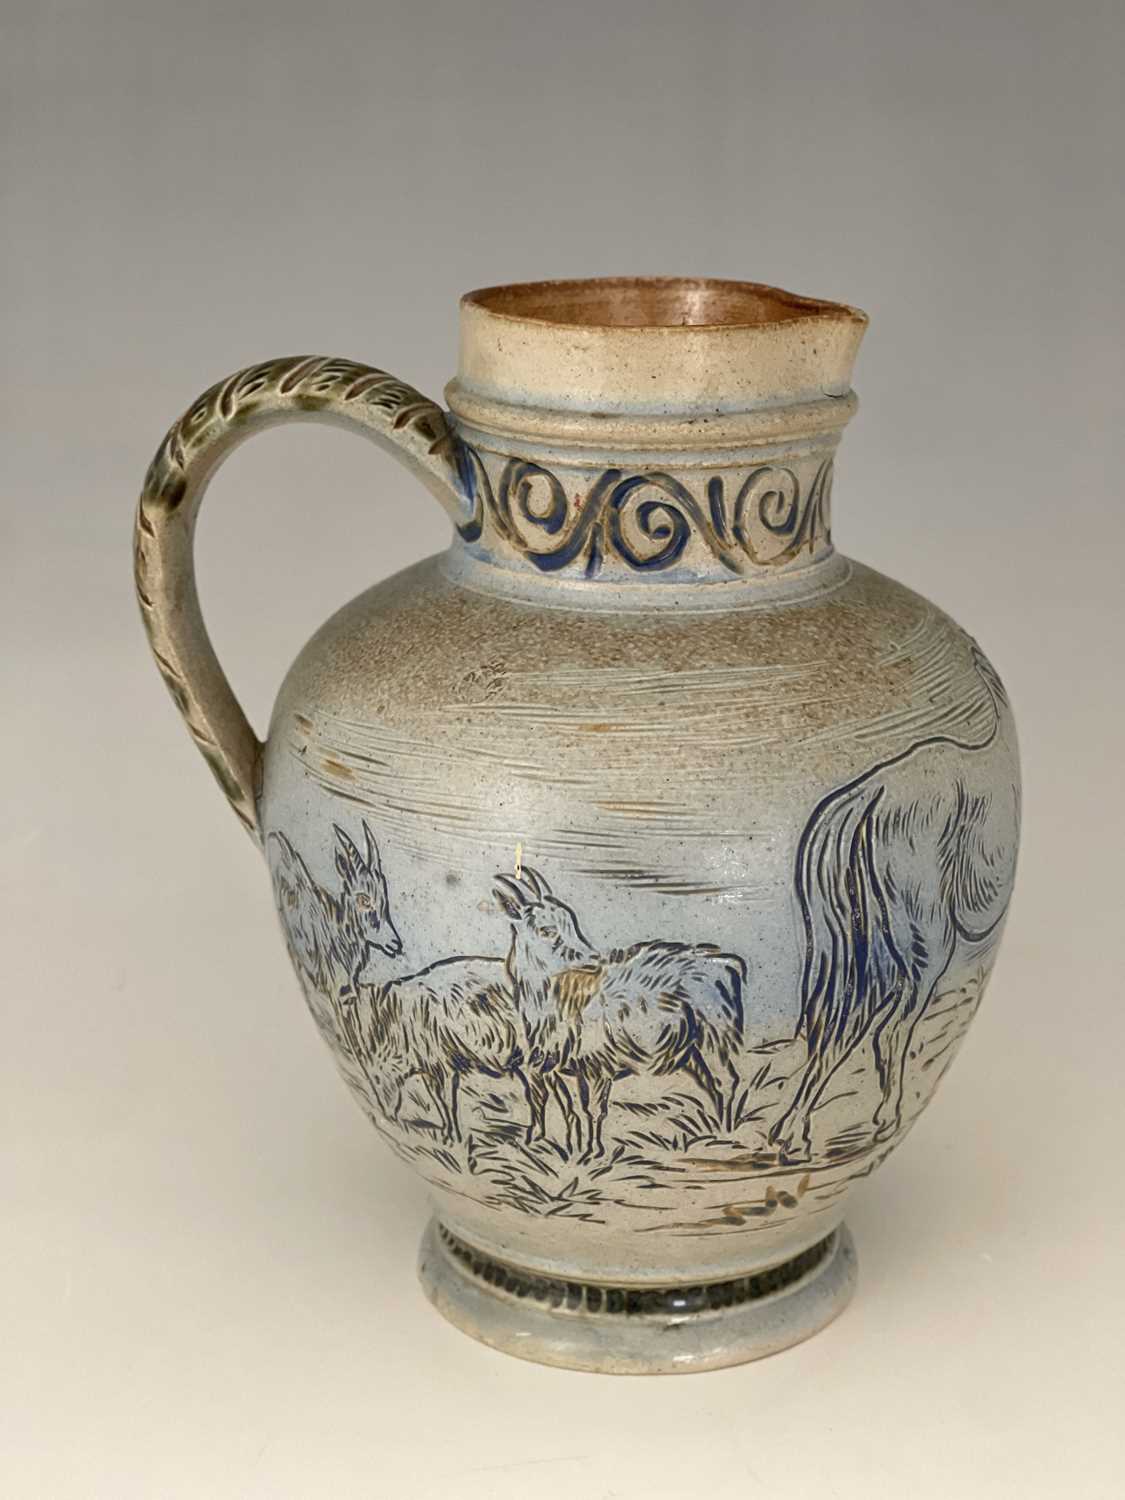 Hannah Barlow for Doulton Lambeth, a stoneware jug, 1874, shouldered ovoid form, sgraffito decorated - Image 3 of 9